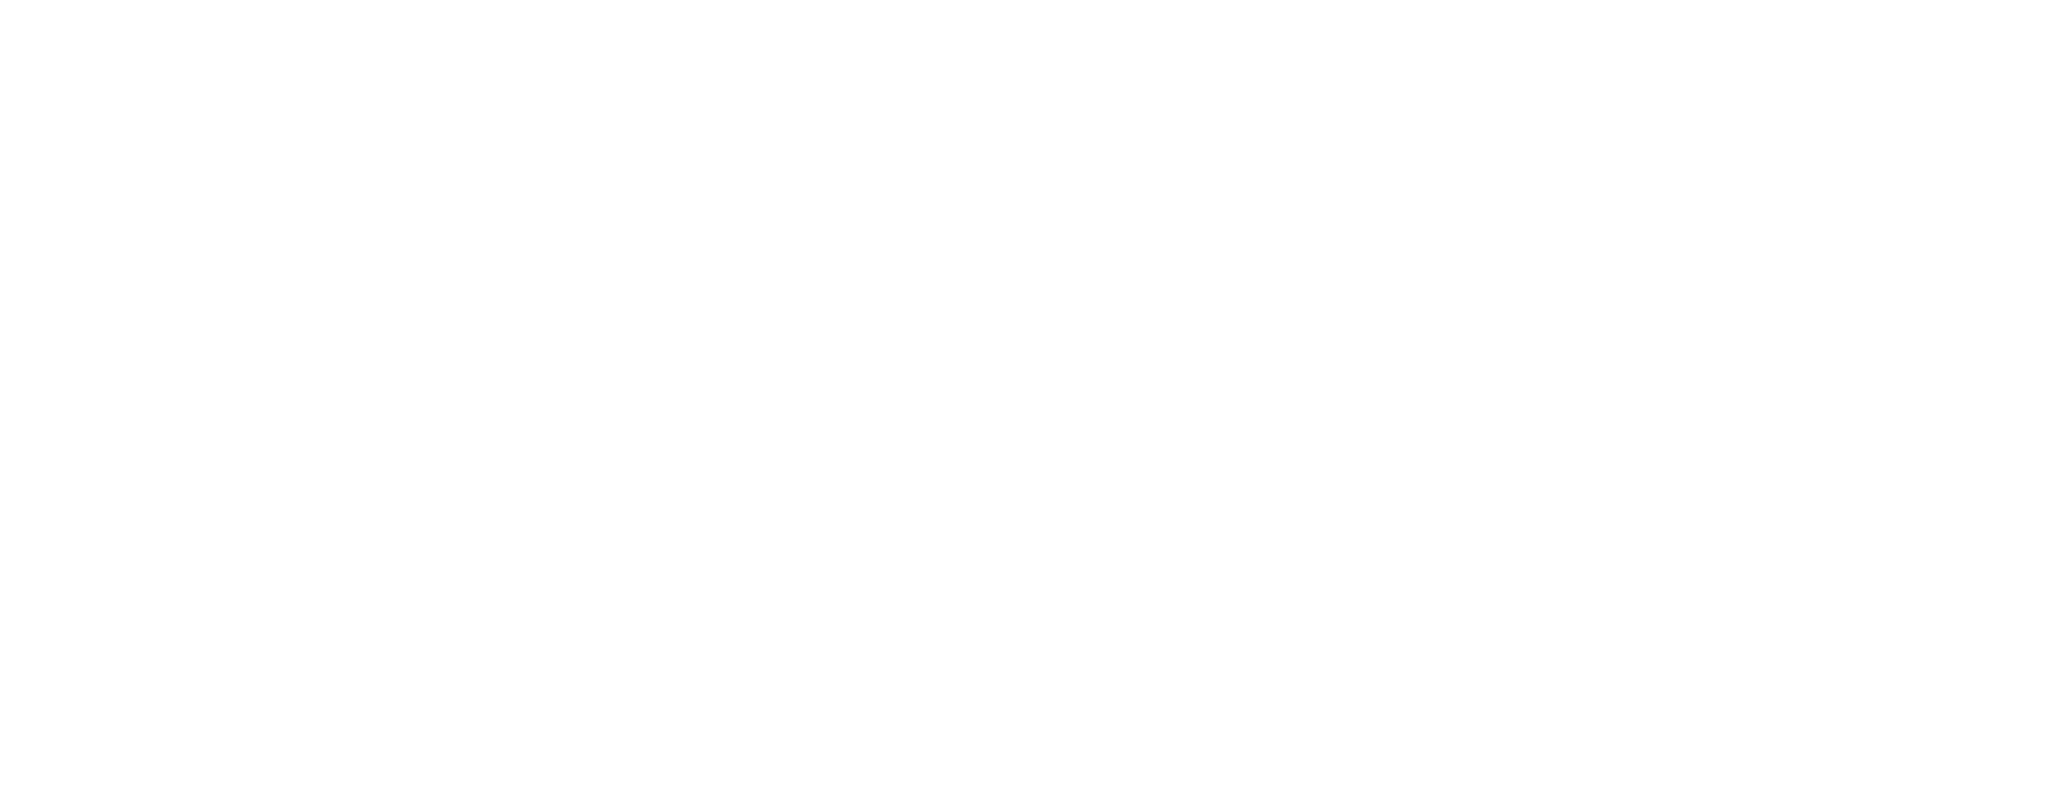 A green background with white letters that say " dors ' villa ".